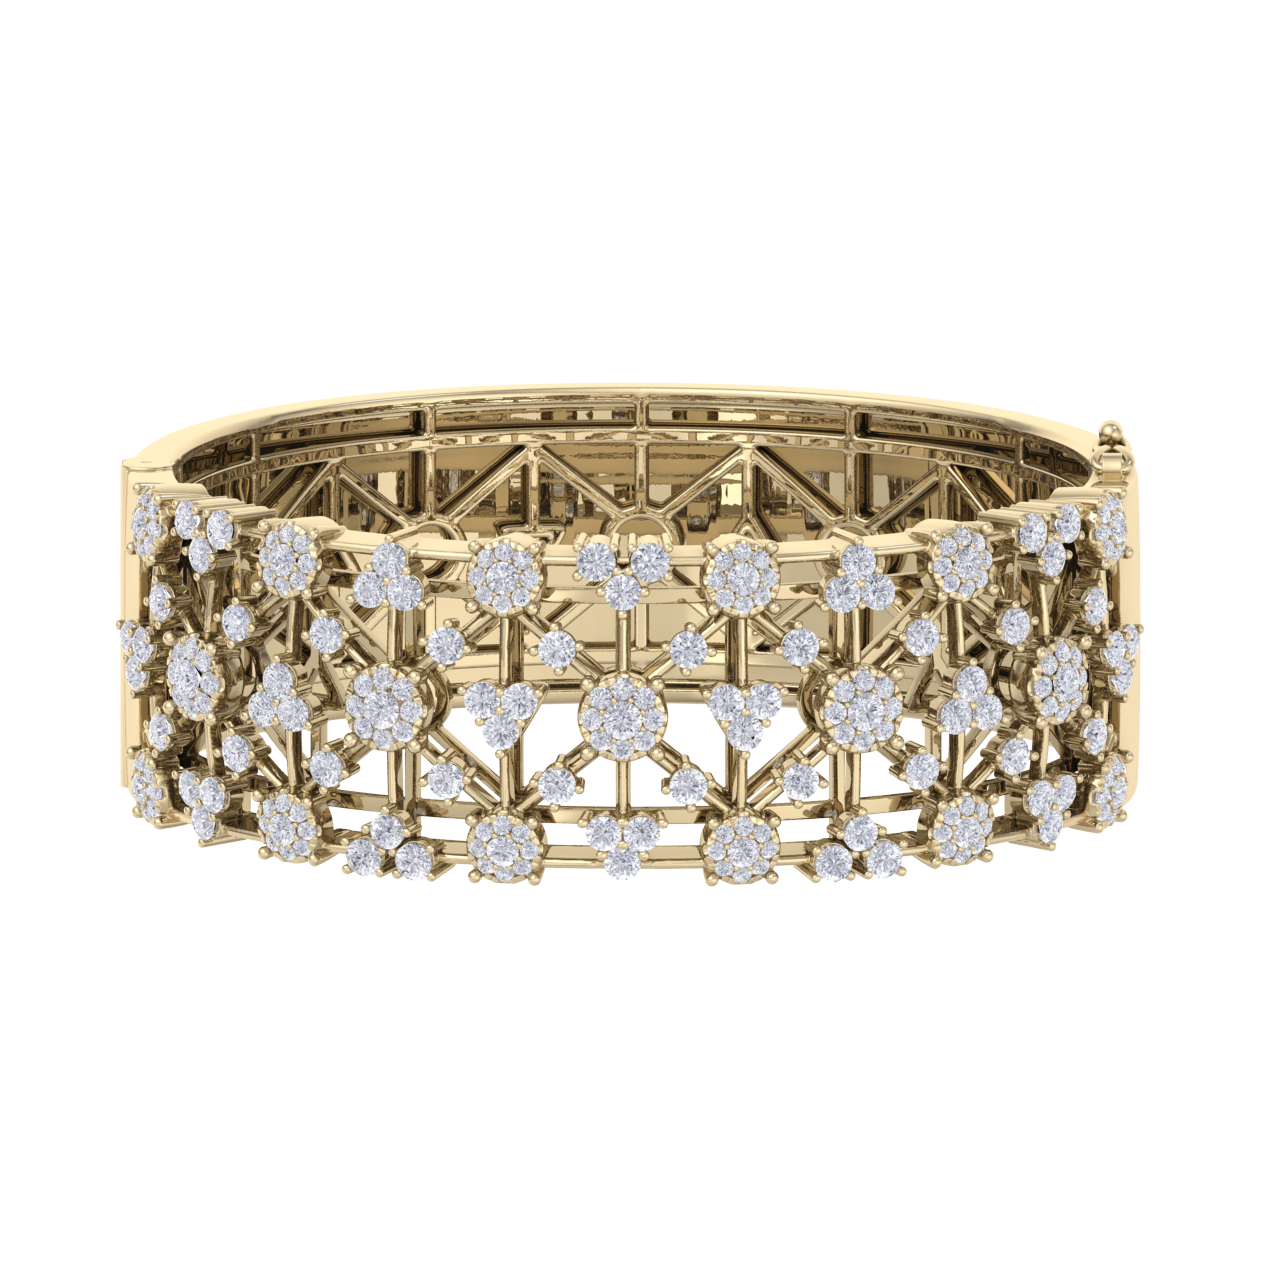 Diamond bangle in yellow gold with white diamonds of 6.21 ct in weight
